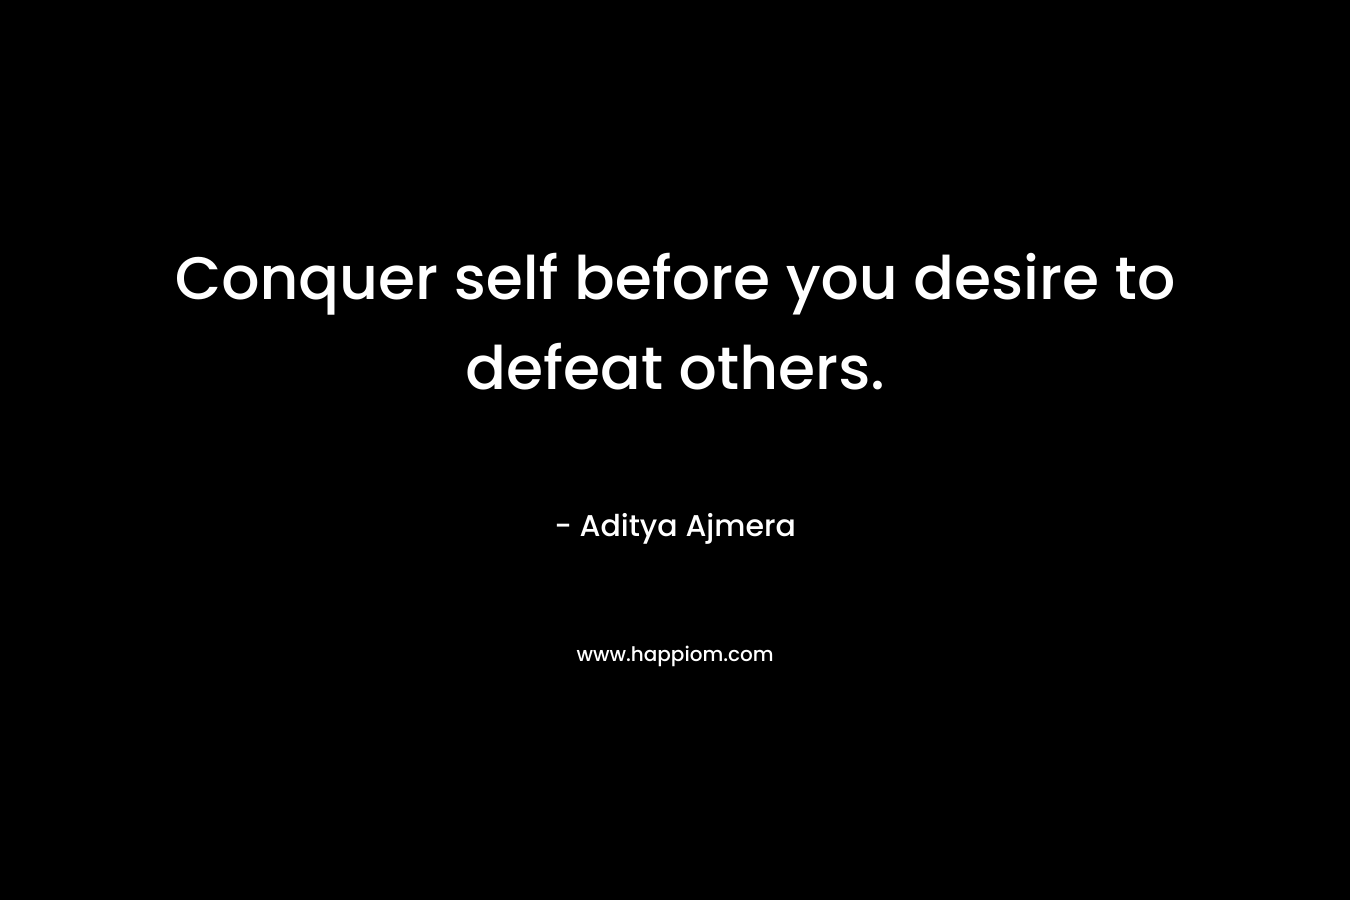 Conquer self before you desire to defeat others.